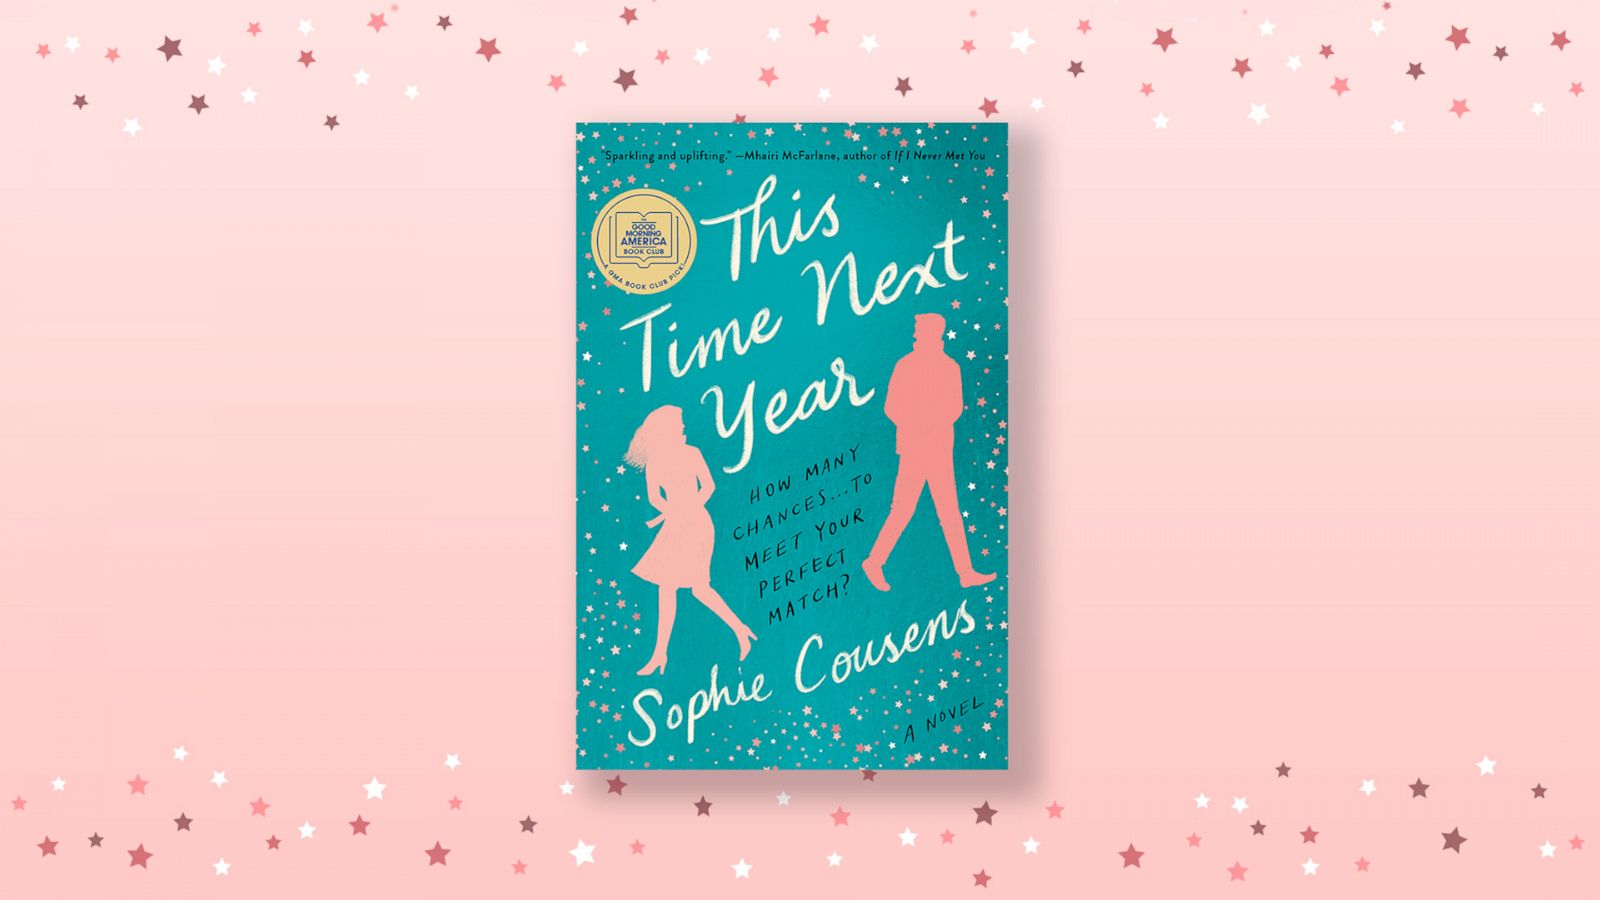 This Time Next Year: A GMA Book Club Pick (A Novel) - Kindle edition by  Cousens, Sophie. Literature & Fiction Kindle eBooks @ .